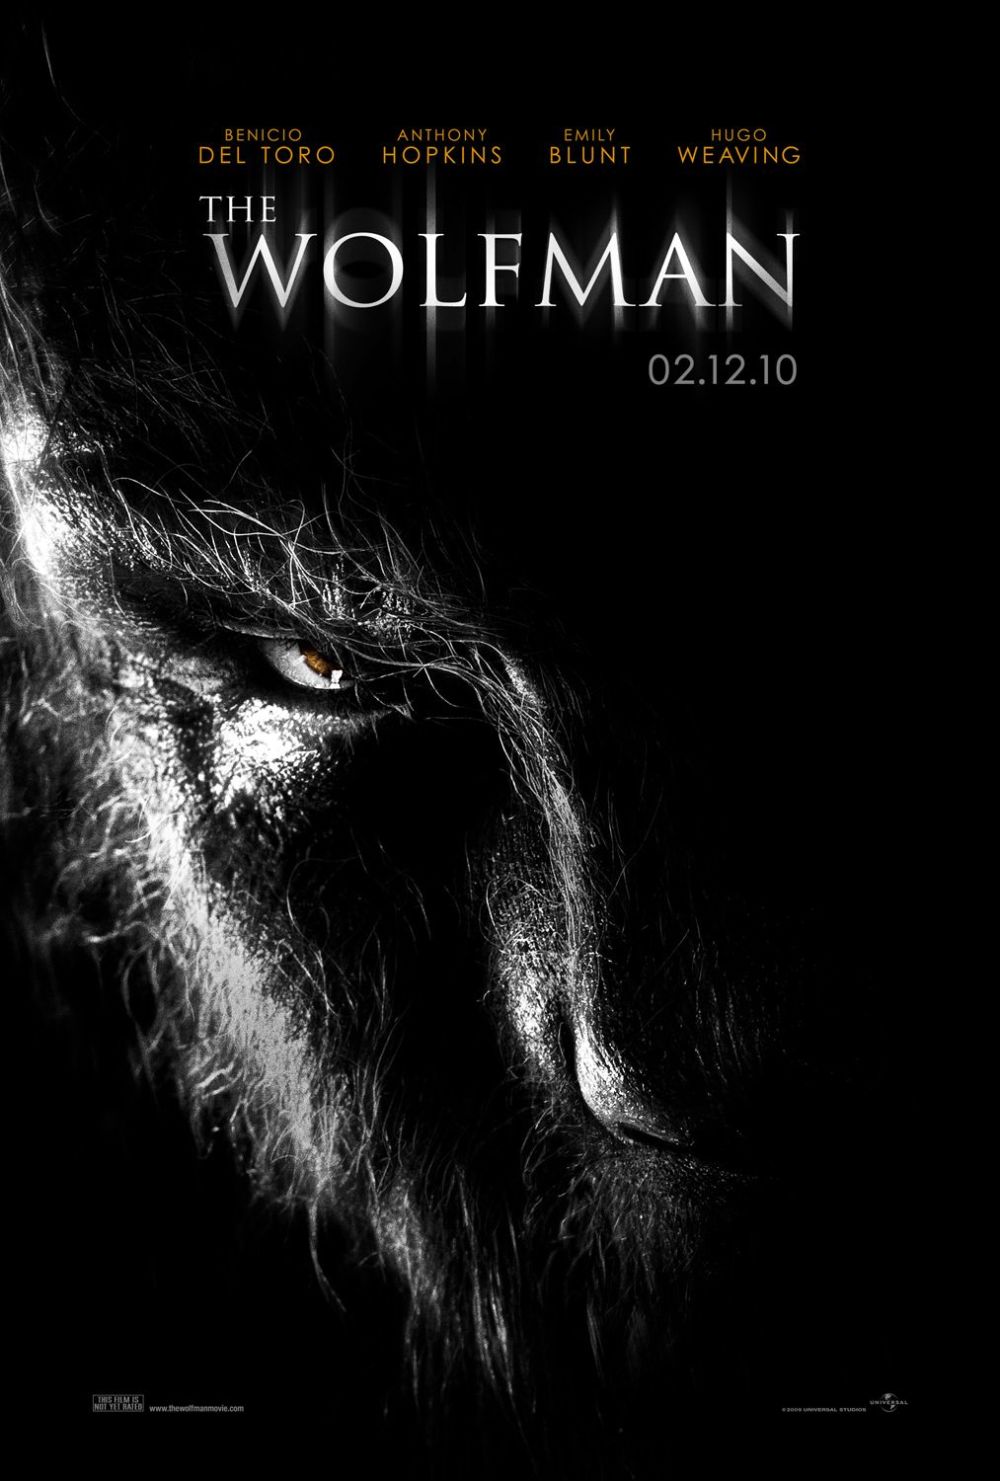 The Wolfman filmposters